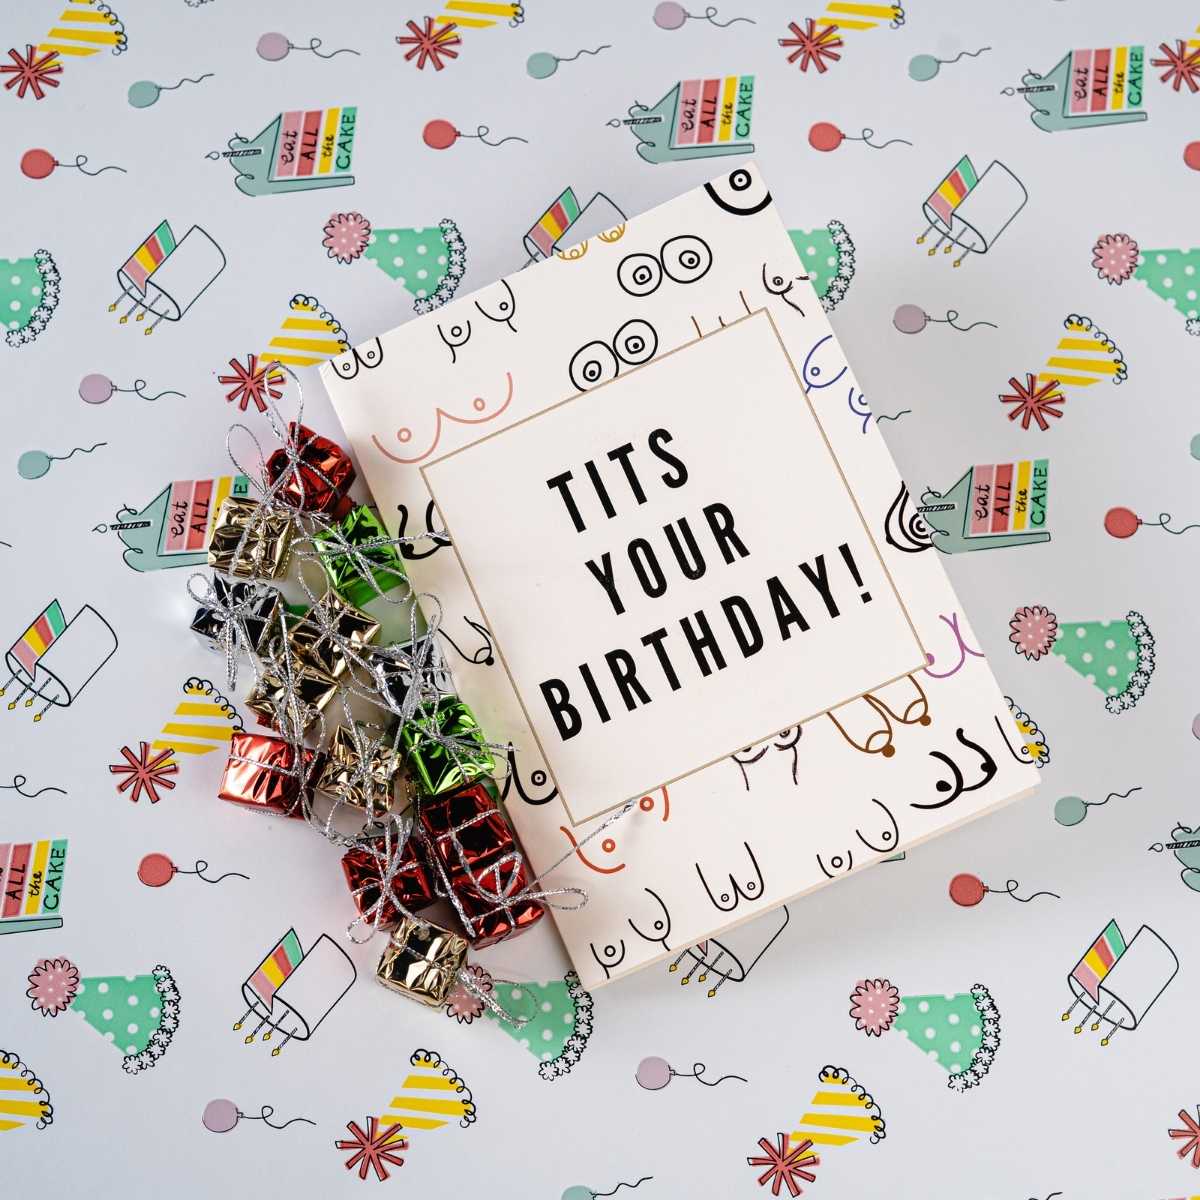 Tits Your Birthday - Never Ending Birthday Card for Her - DickAtYourDoor